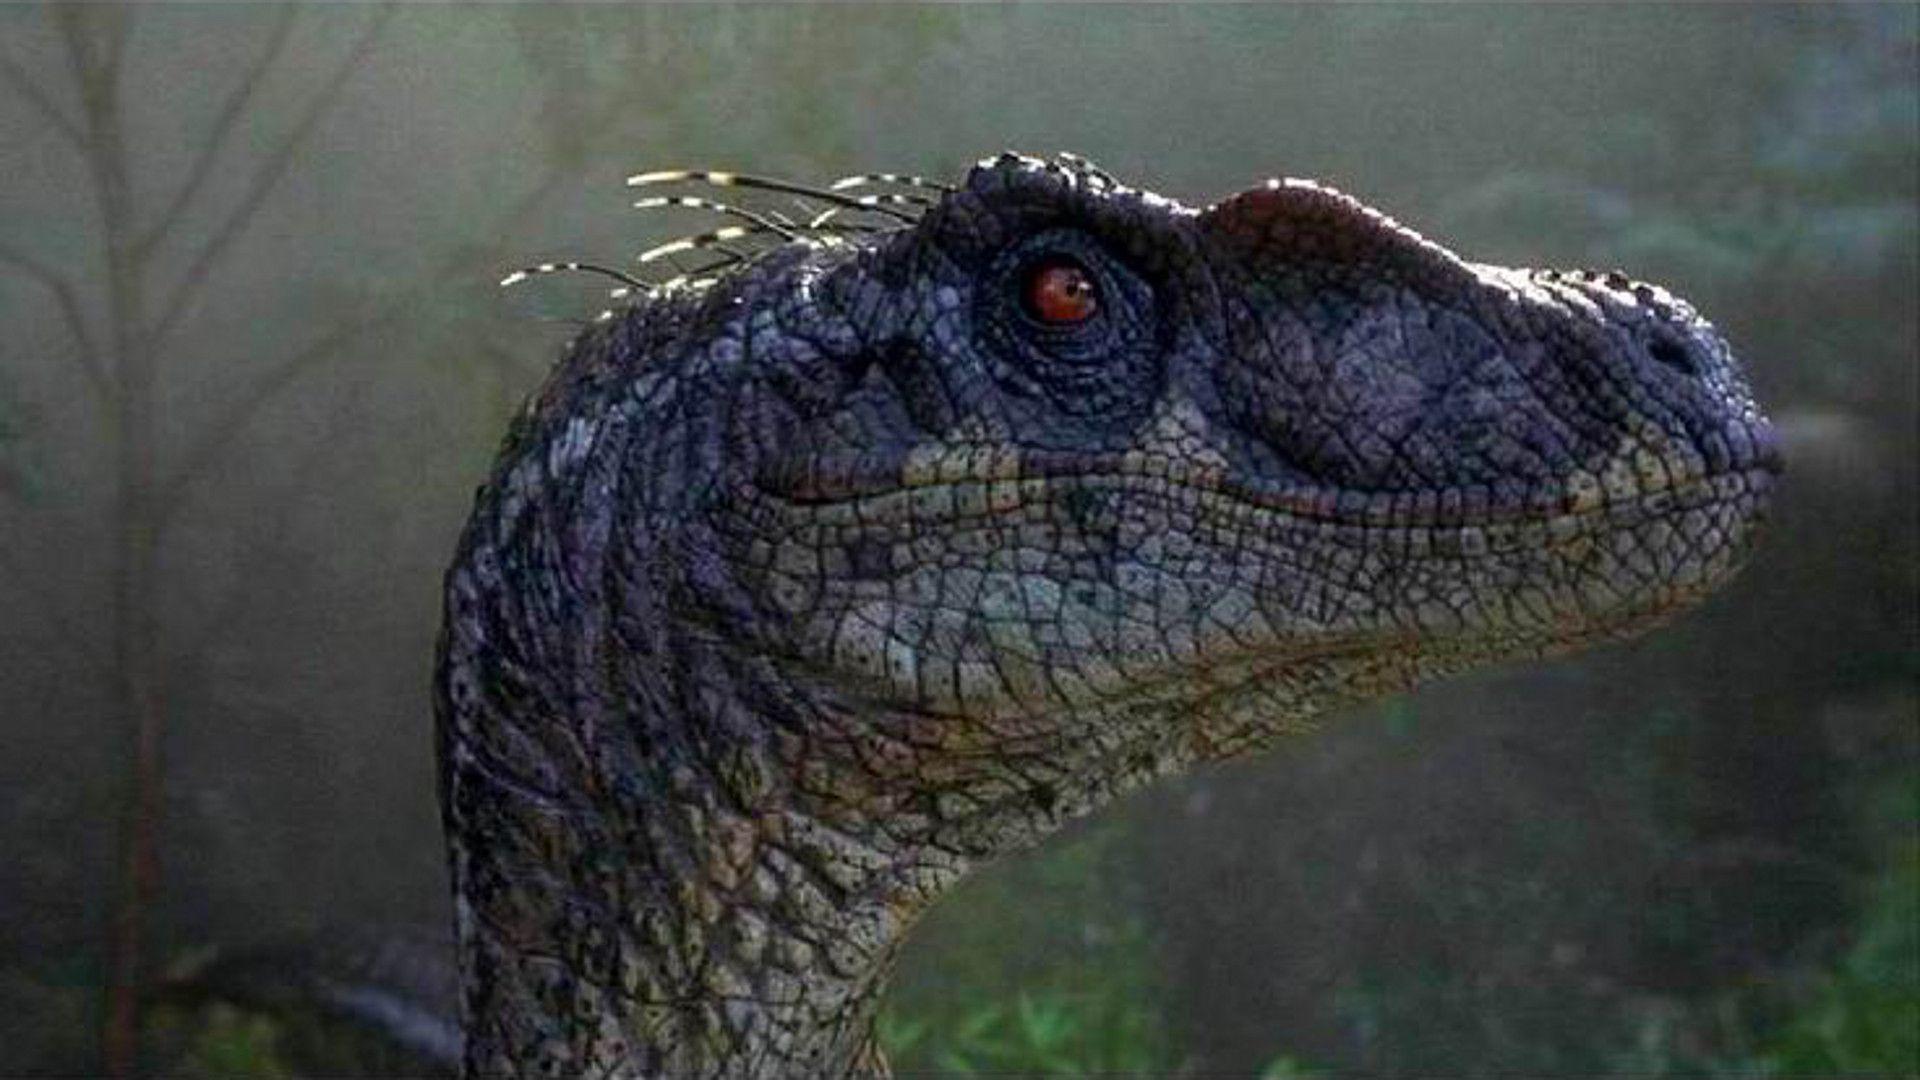 Jurassic Park III' brings the original trilogy to an end with a